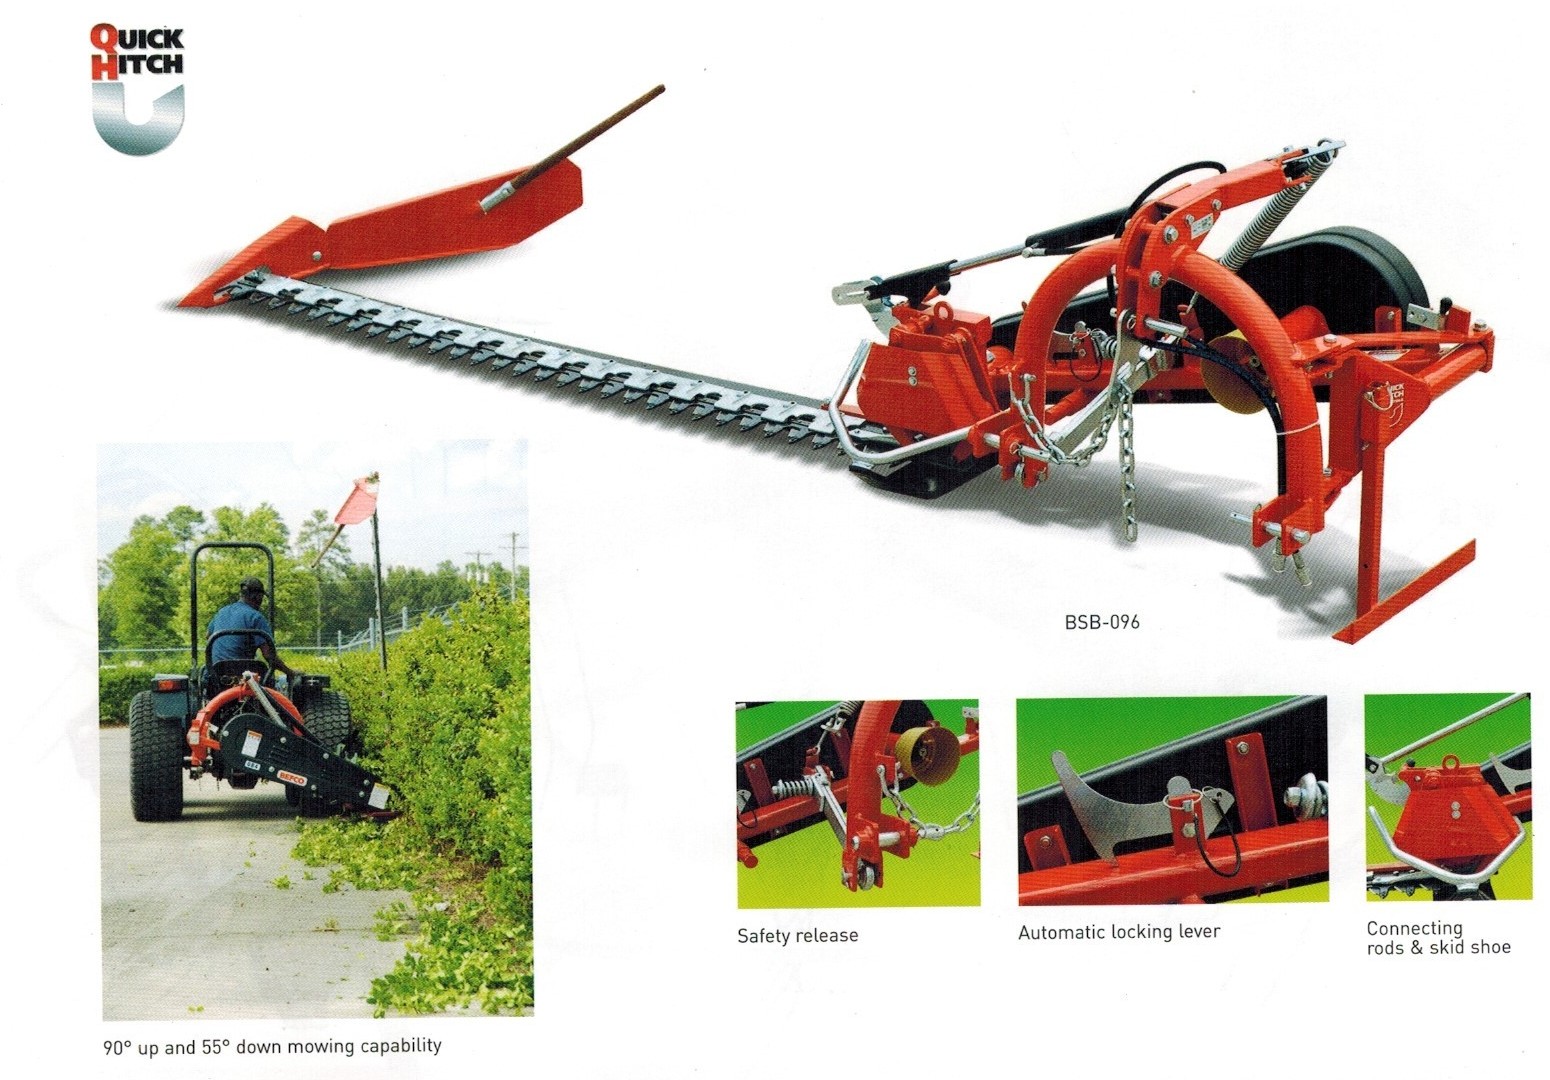 Befco BSB Series Sickle Bar Mowers With Hydraulic Lift On The Sickle Bar